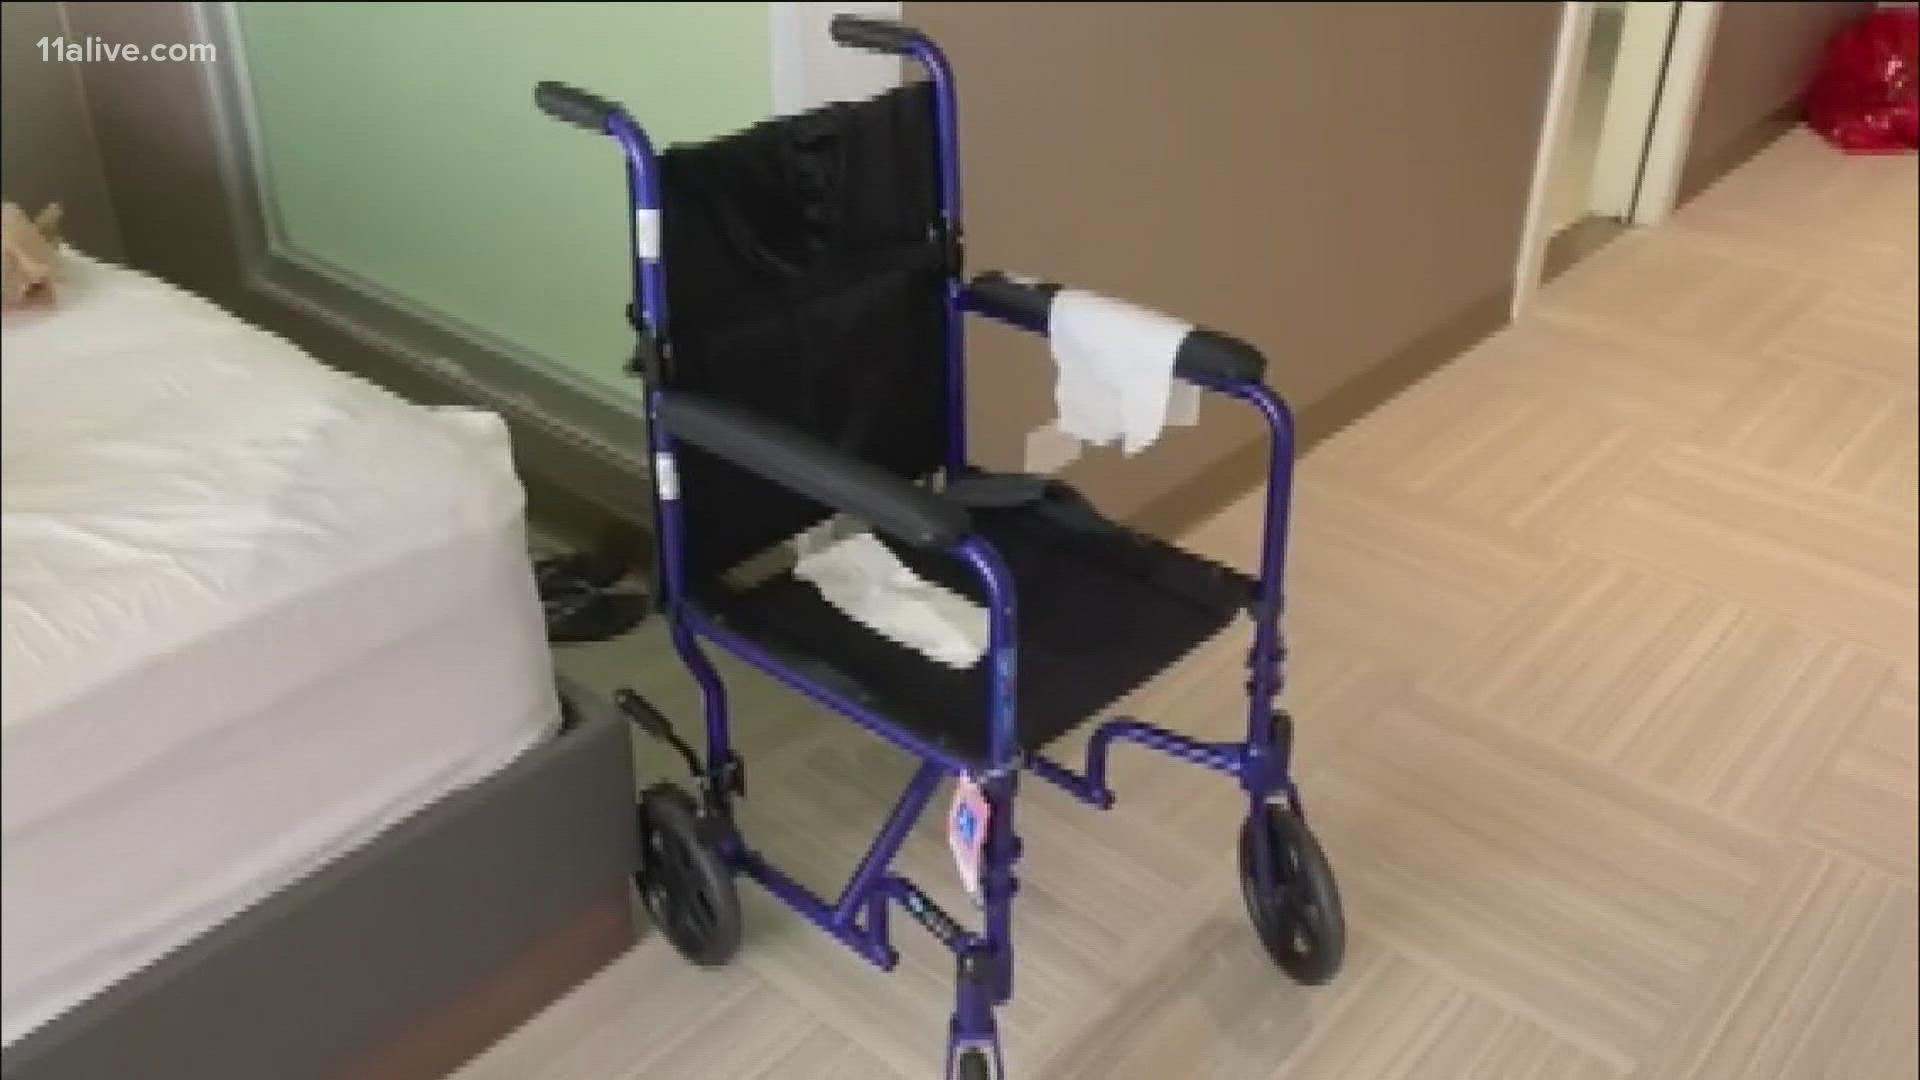 Family said conditions are not appropriate for those with disabilities.